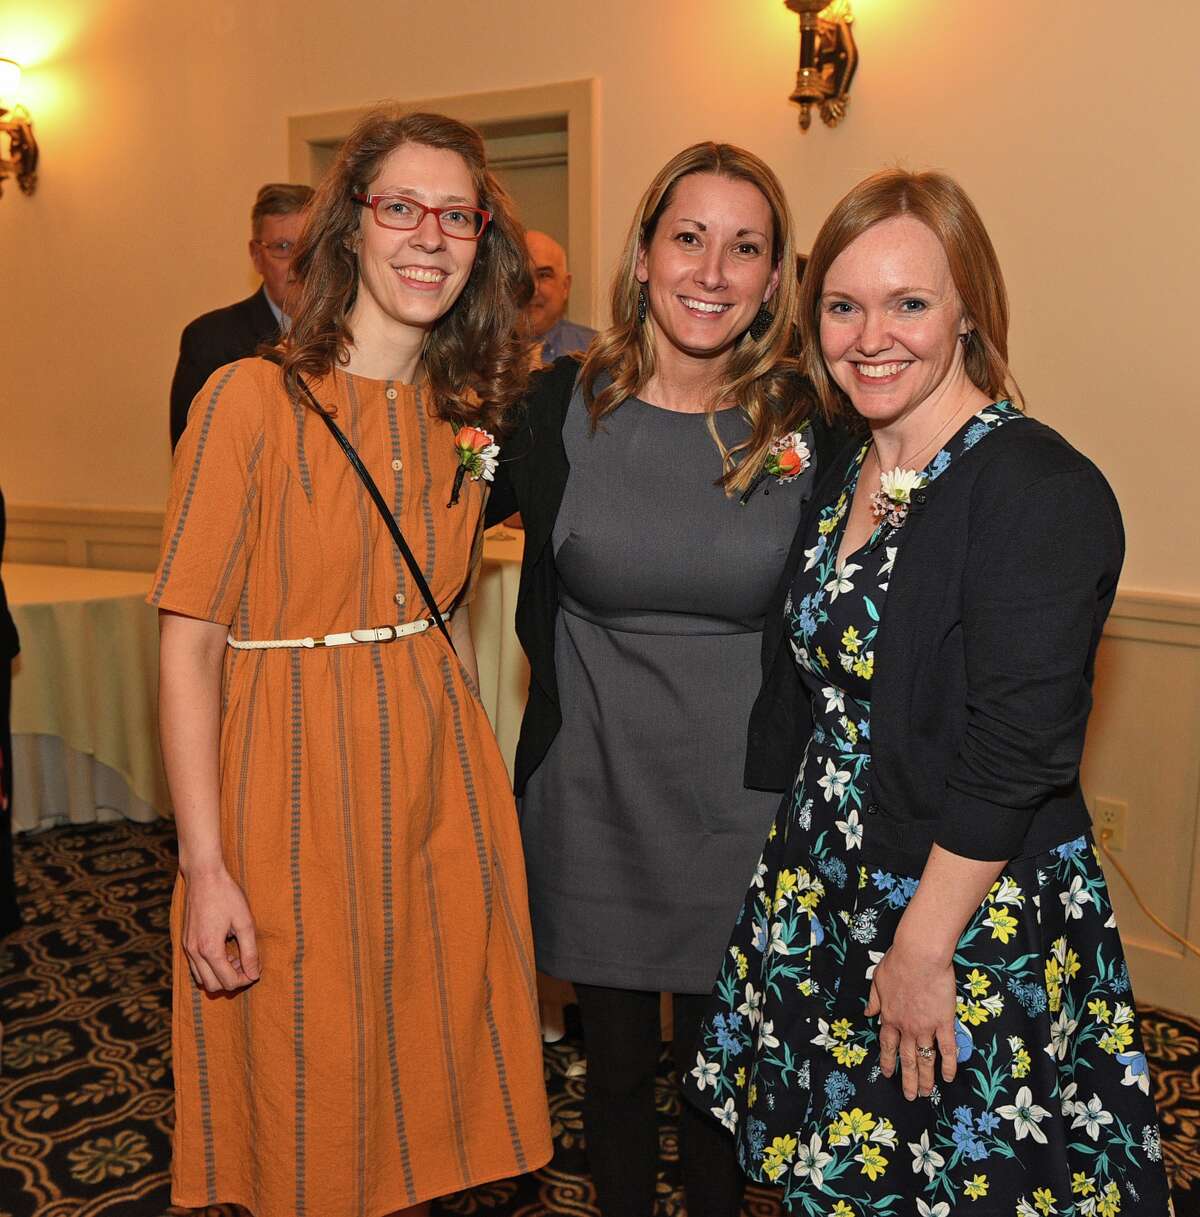 Were you Seen at the Rensselaer County Regional Chamber of Commerce Leadership Institute Class of 2019 Graduation Ceremony & Dinner on Thursday, April 4, 2019 at the Franklin Terrace Ballroom in Troy?